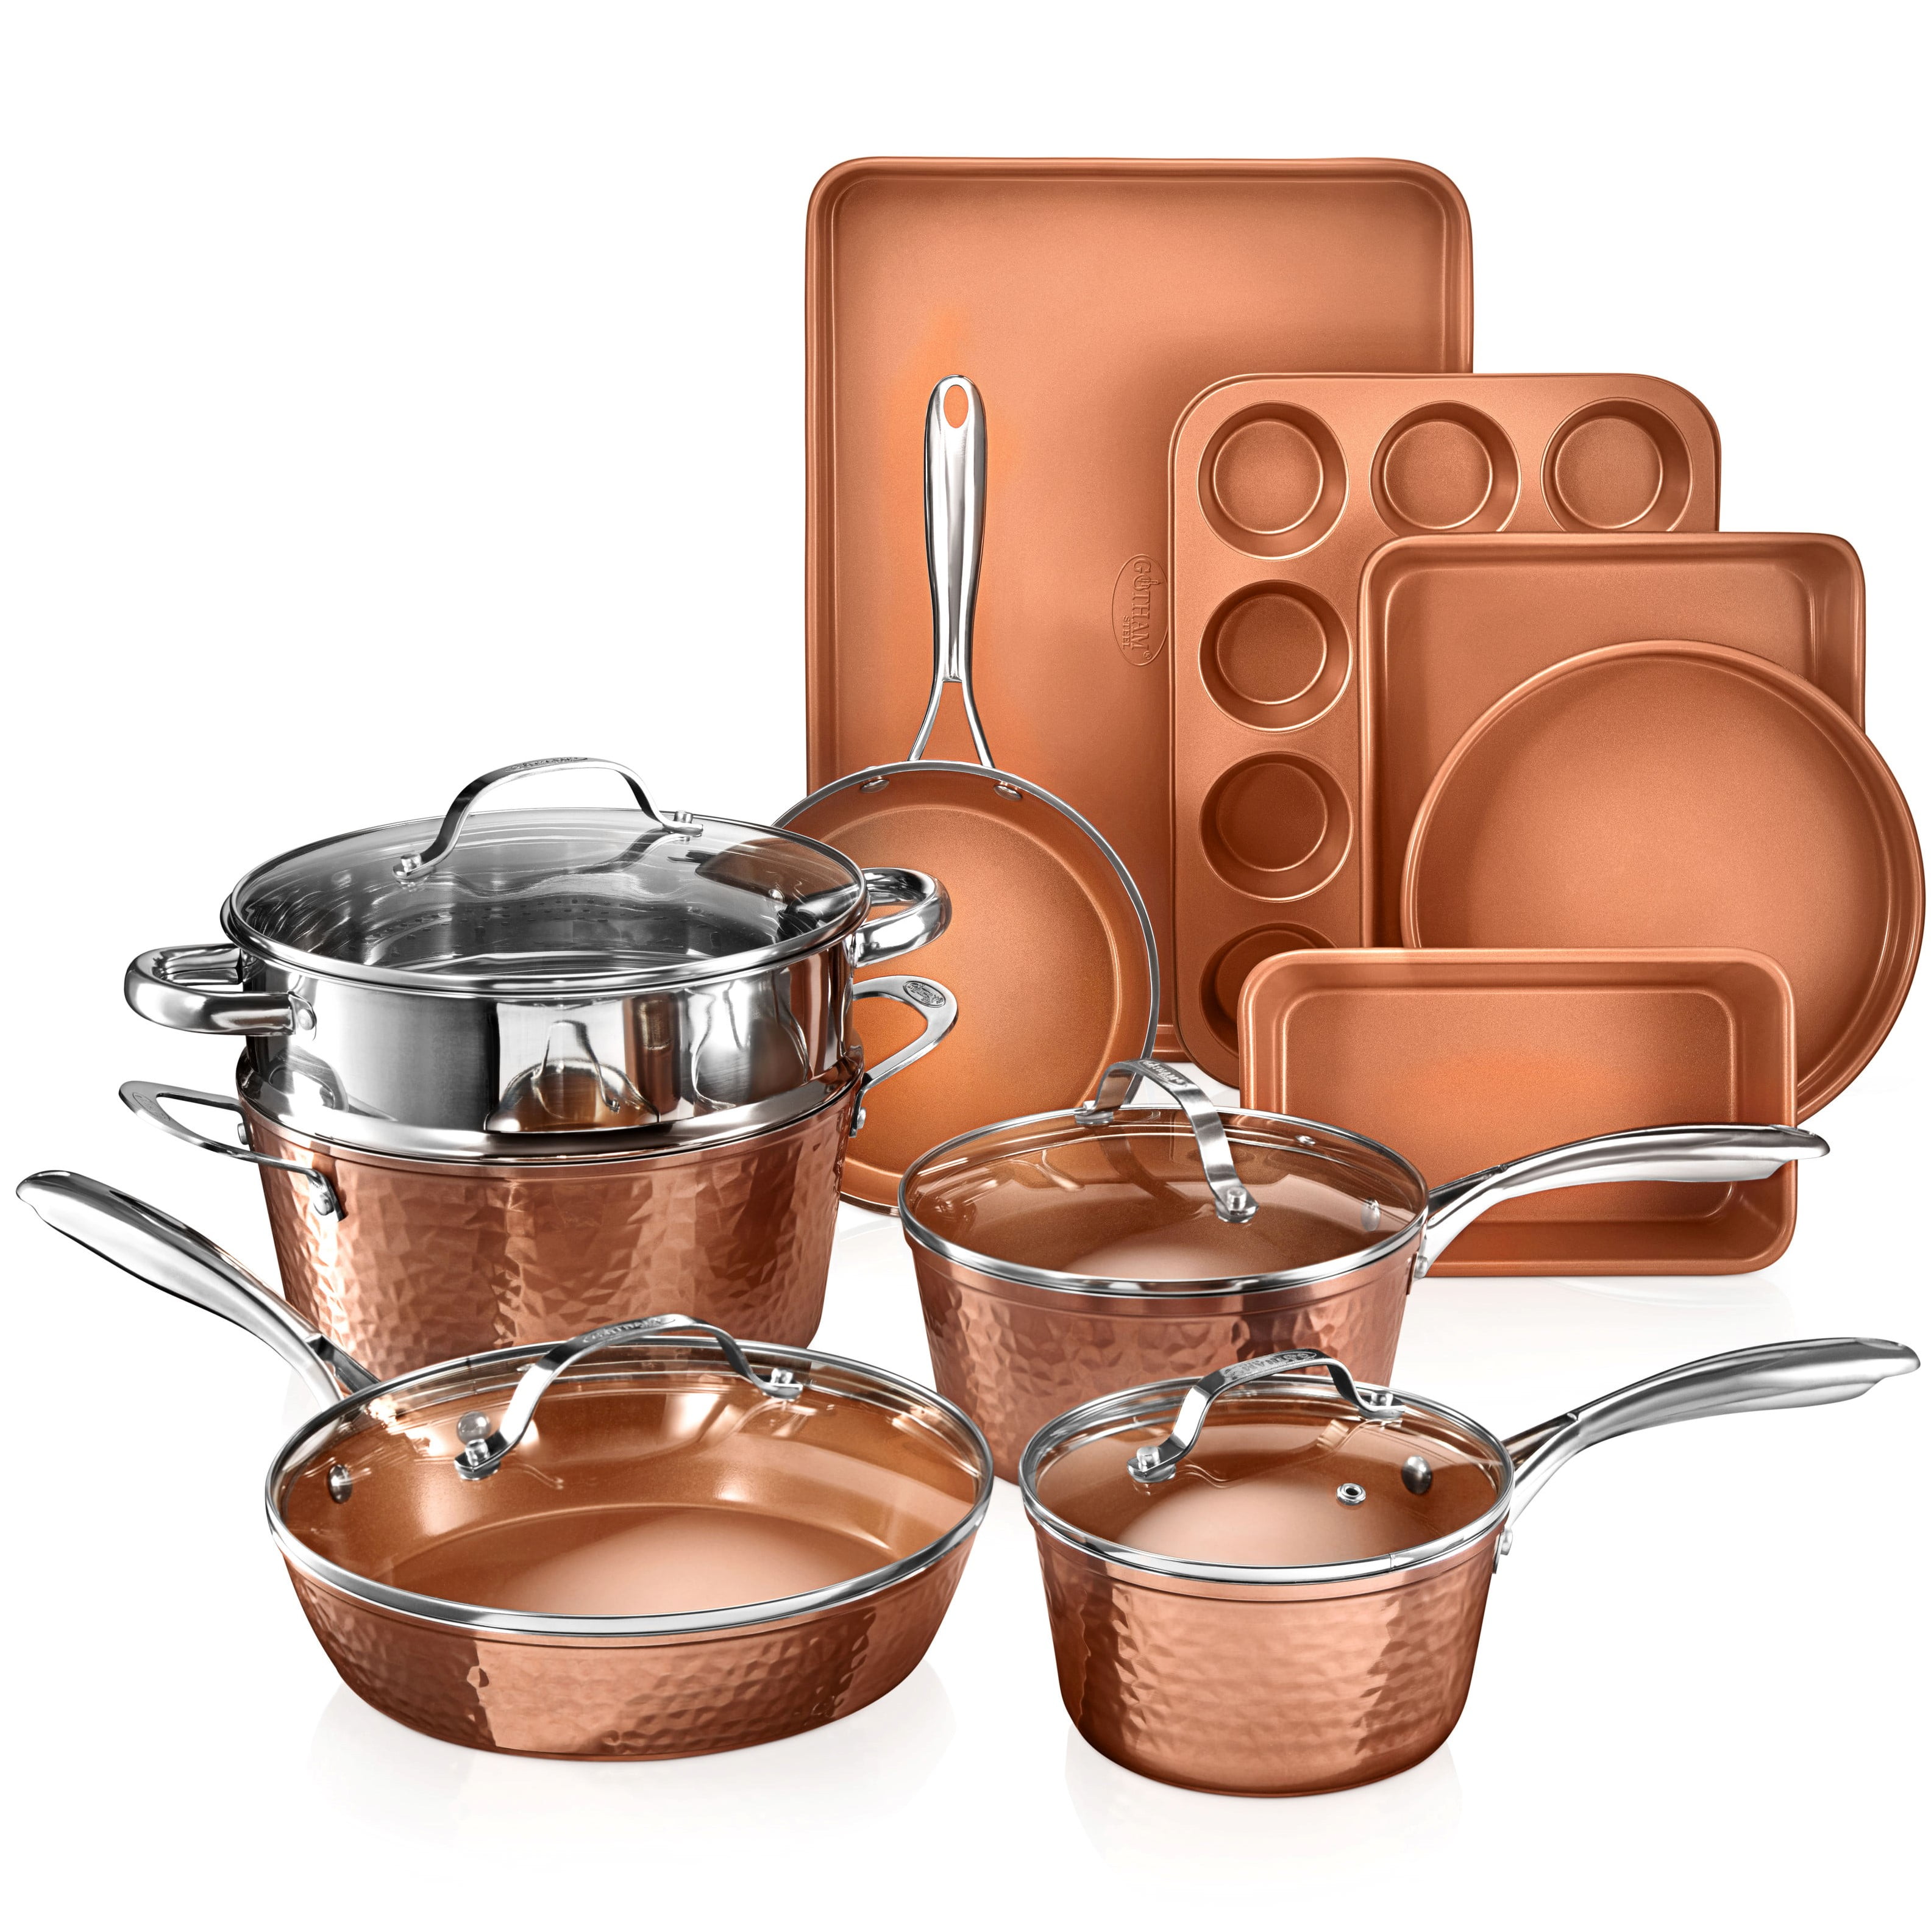 Gotham Steel Hammered Copper 10 Pc Pots and Pans Set Non Stick Cookware  Set, Non Toxic Ceramic Cookware Set, Kitchen Cookware Sets with Induction